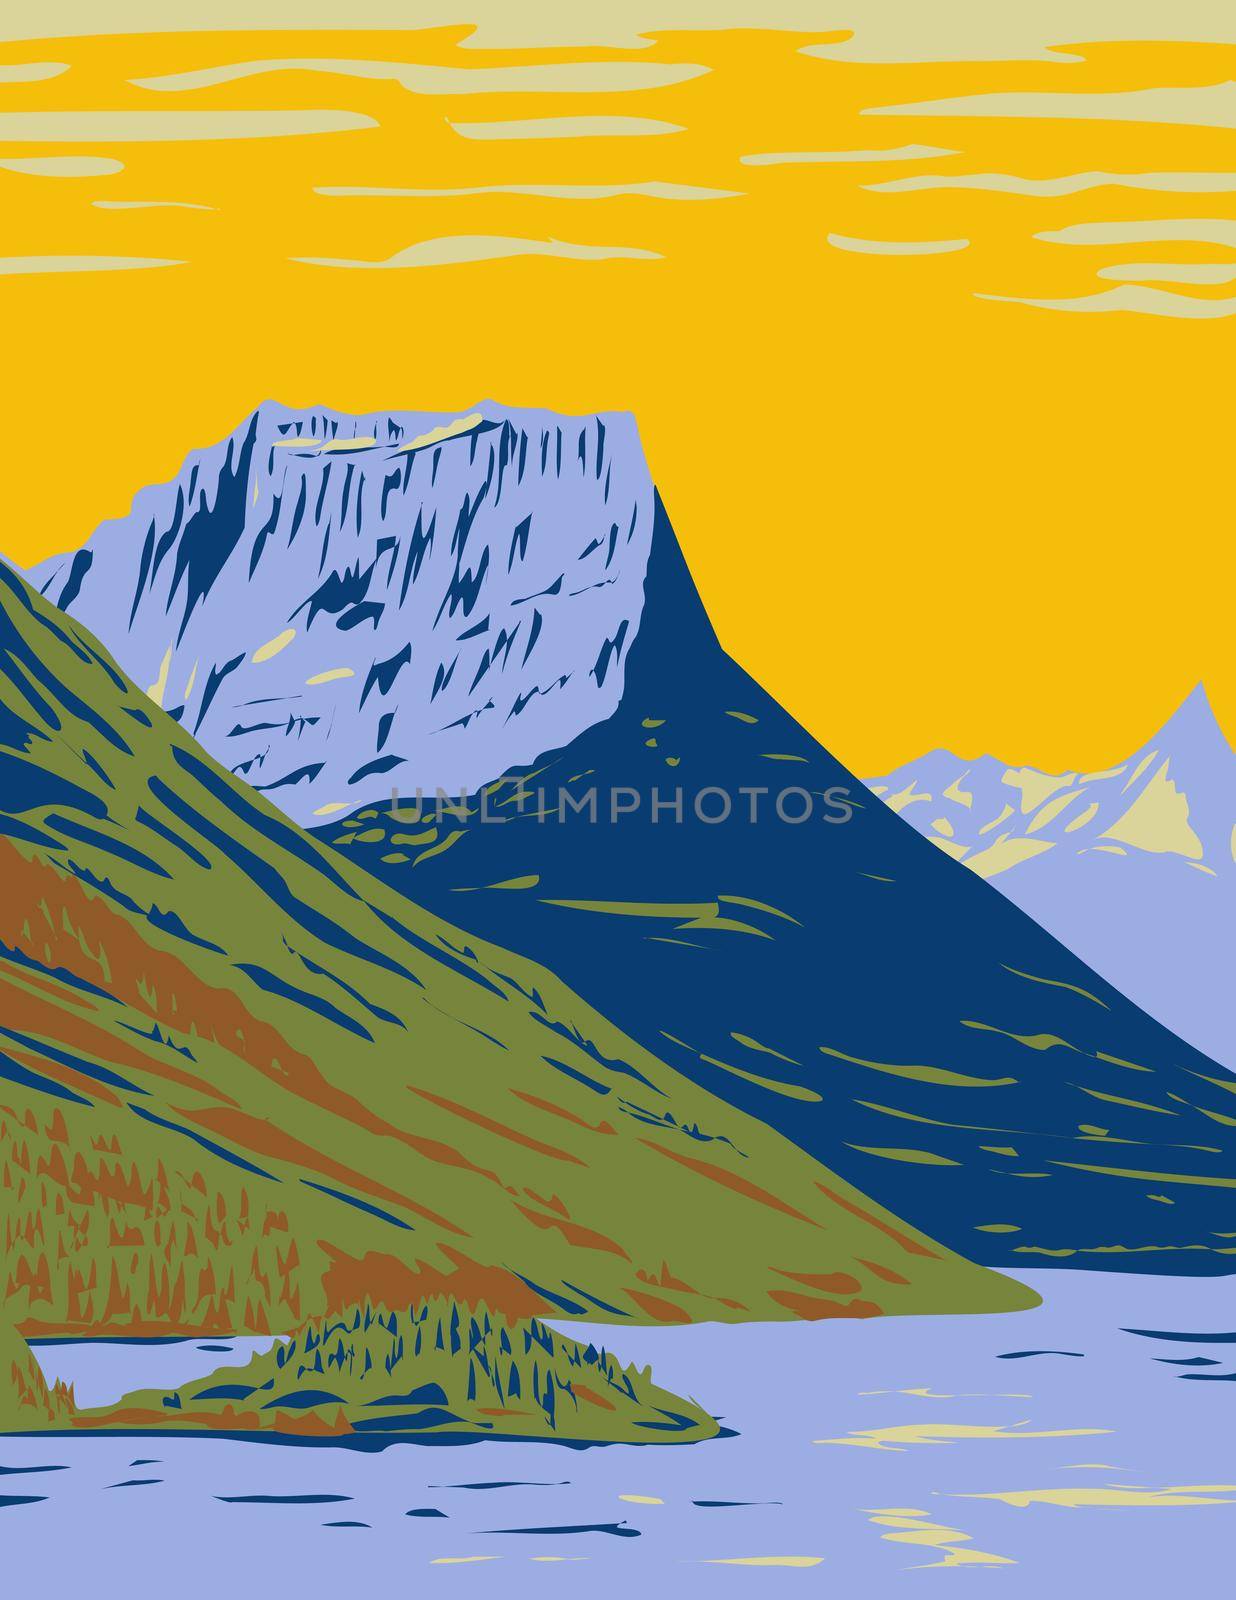 Waterton-Glacier International Peace Park the Union of Waterton Lakes National Park in Canada and Glacier National Park in the United States WPA Poster Art by patrimonio